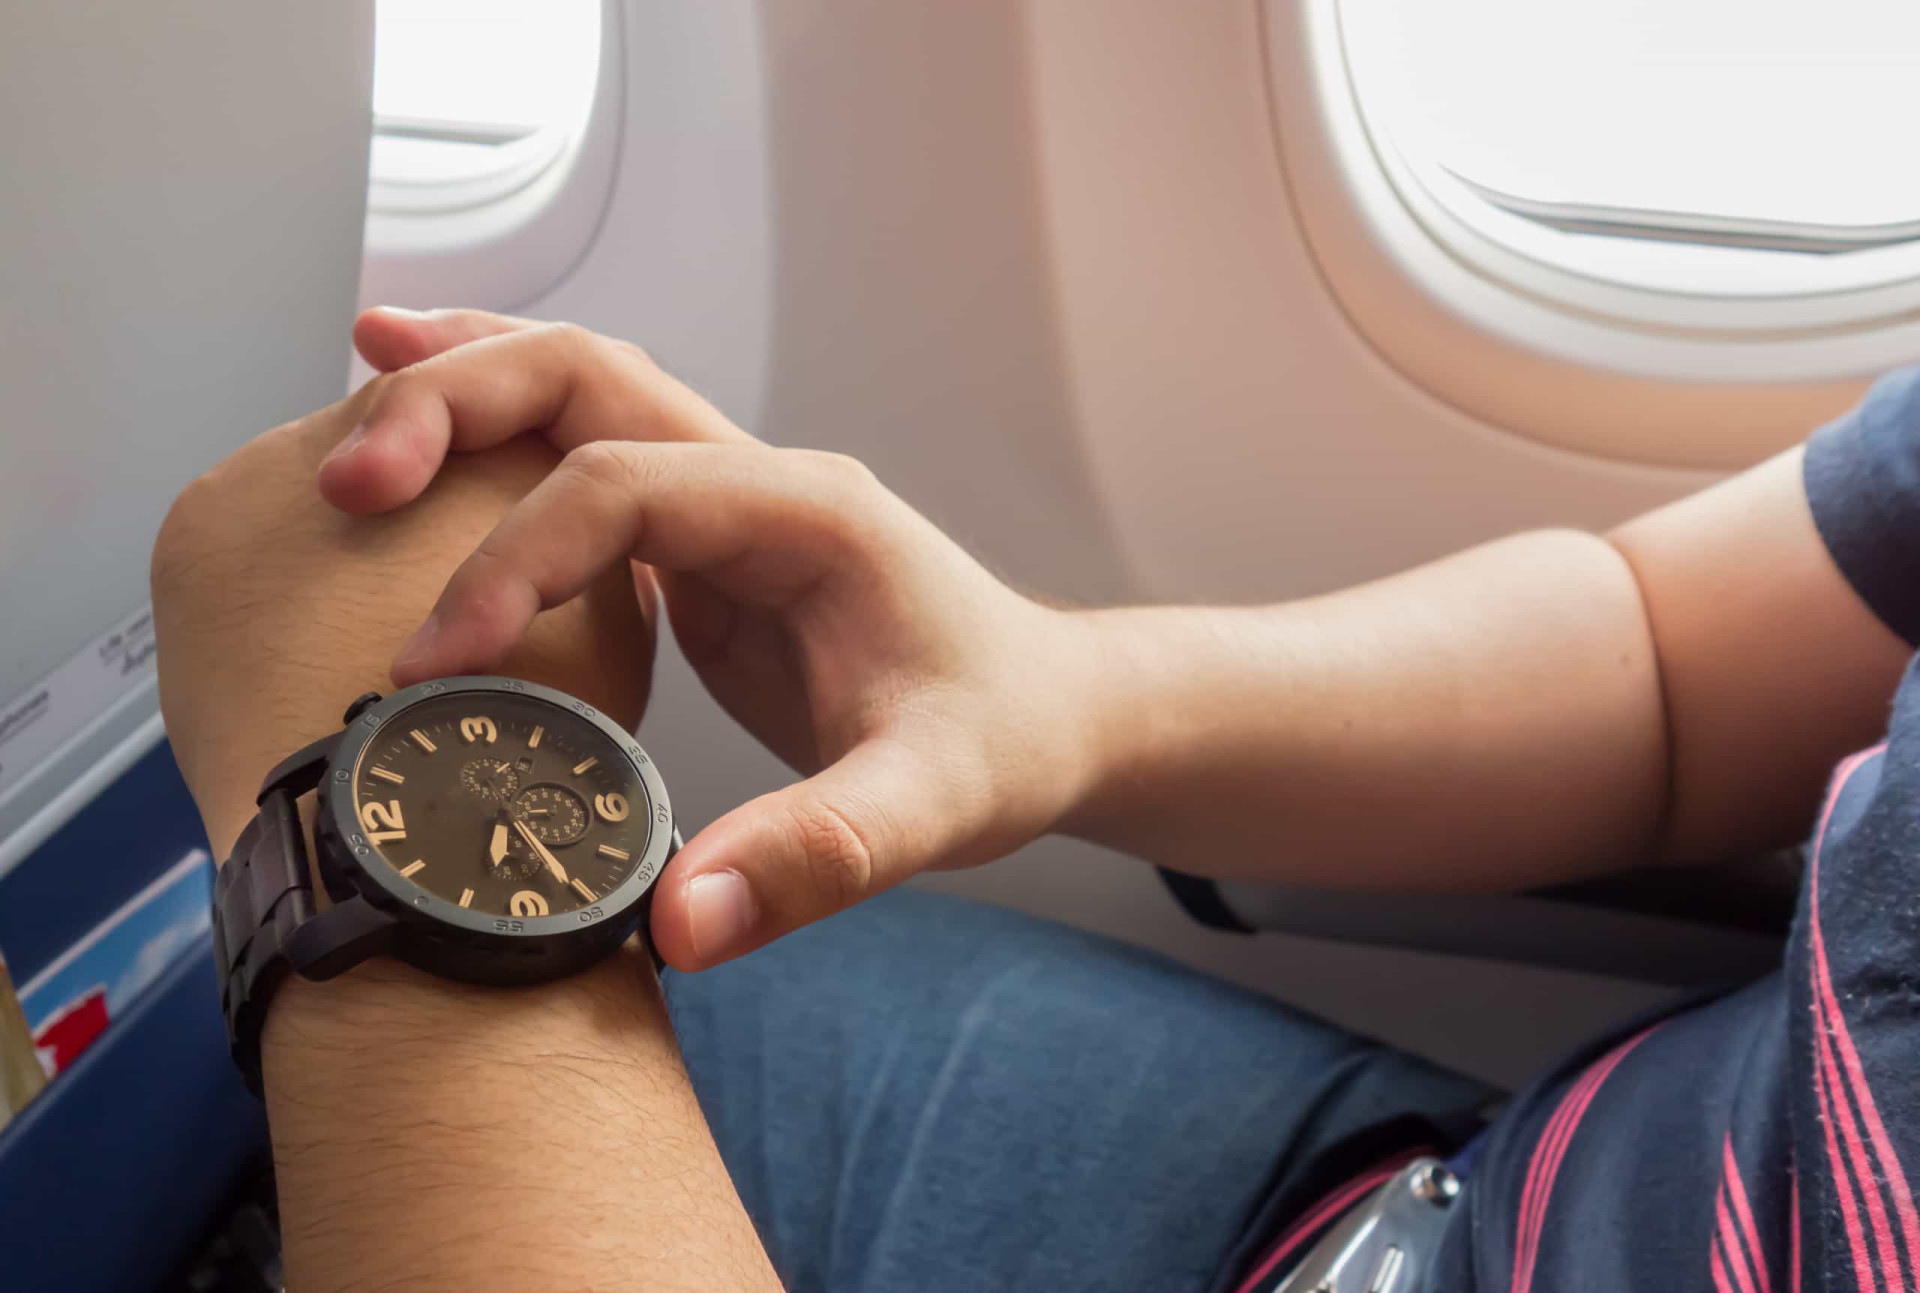 <p>It's important to prepare yourself for the time zone of where you're heading. When you get on the plane, change your watch to the local time of your destination, then alter your routine accordingly.</p><p><a href="https://www.msn.com/en-us/community/channel/vid-7xx8mnucu55yw63we9va2gwr7uihbxwc68fxqp25x6tg4ftibpra?cvid=94631541bc0f4f89bfd59158d696ad7e">Follow us and access great exclusive content every day</a></p>